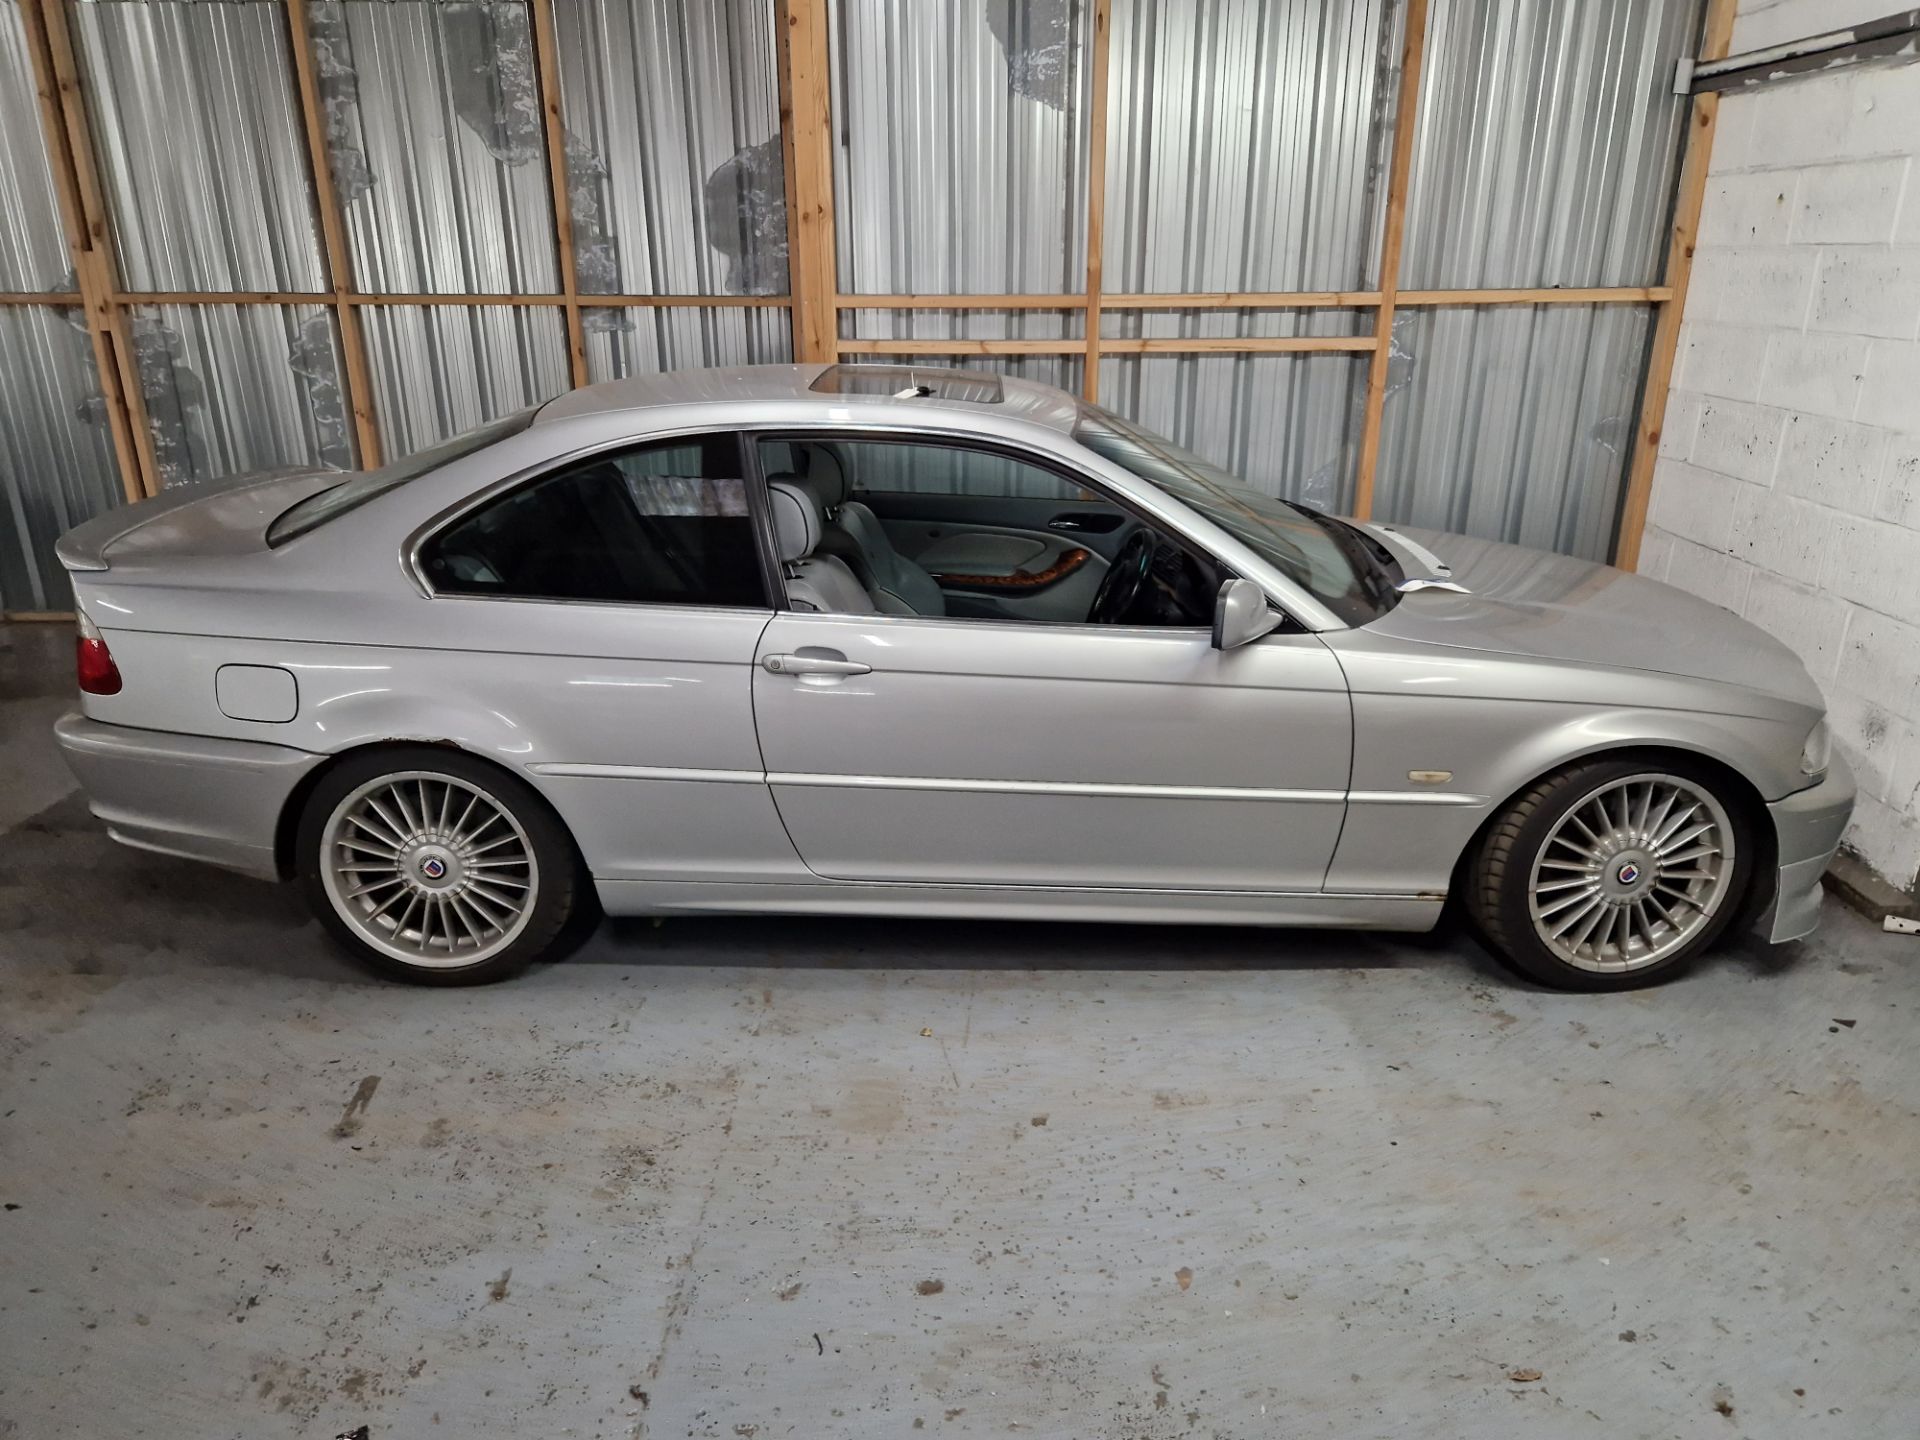 BMW Alpina B3 3.3 Saloon, Registration No. FP51 AOL, Mileage 138,000 (Estimate at time of - Image 2 of 6